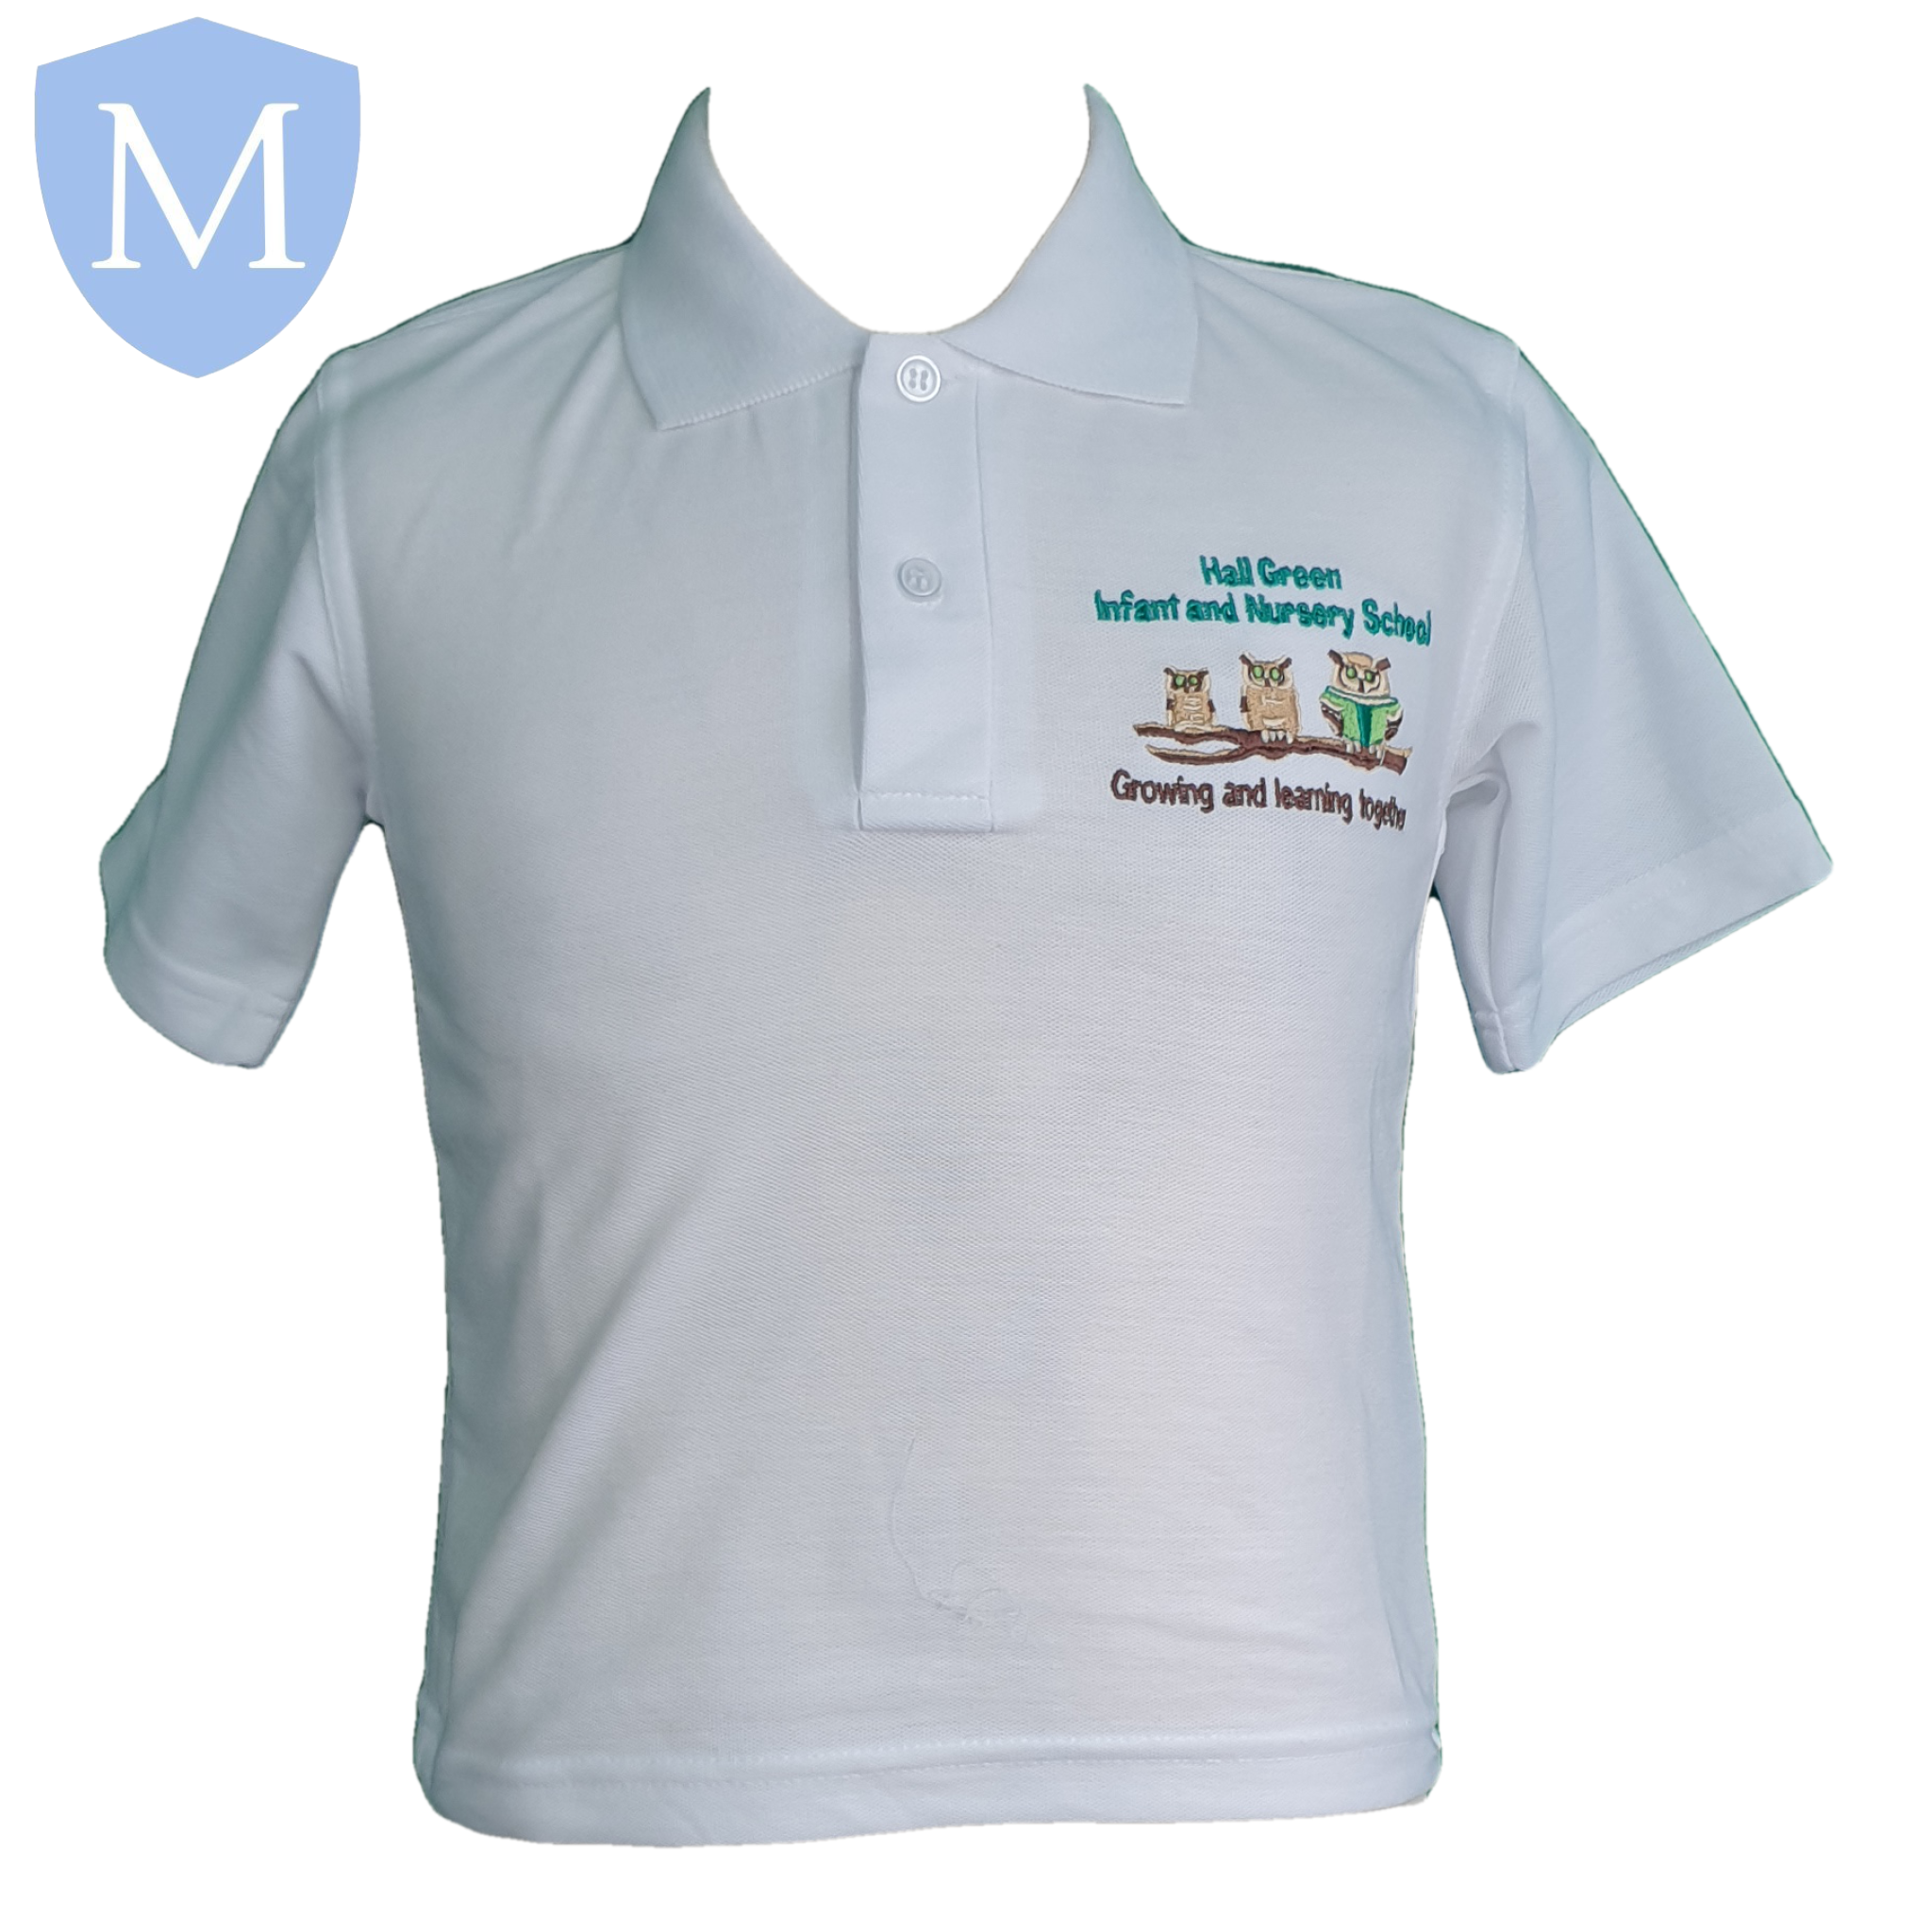 Hall Green Infant Poloshirts Chest 22 (3/4 Years),Chest 24 (5/6 Years),Chest 26 (7/8 Years),Chest 28 (9/10 Years),Chest 30 (11 Years),Chest 32 (12 Years),Chest 34 (13 Years),Chest 36 (14 Years),Chest 38 (15/16 Years),Chest 40,Chest 42